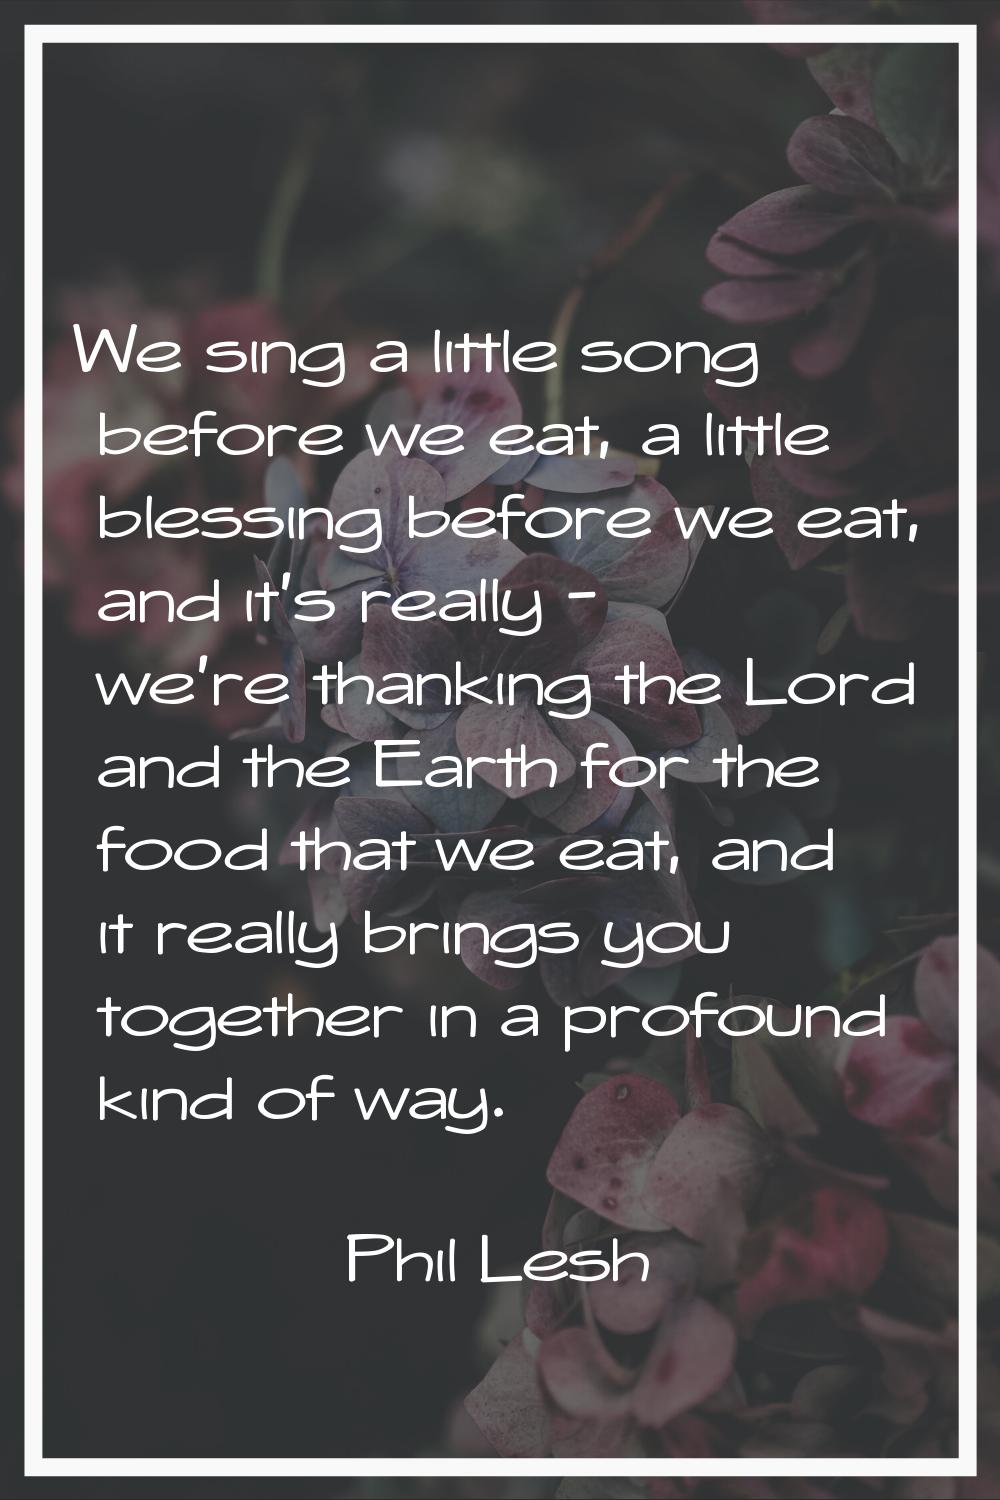 We sing a little song before we eat, a little blessing before we eat, and it's really - we're thank